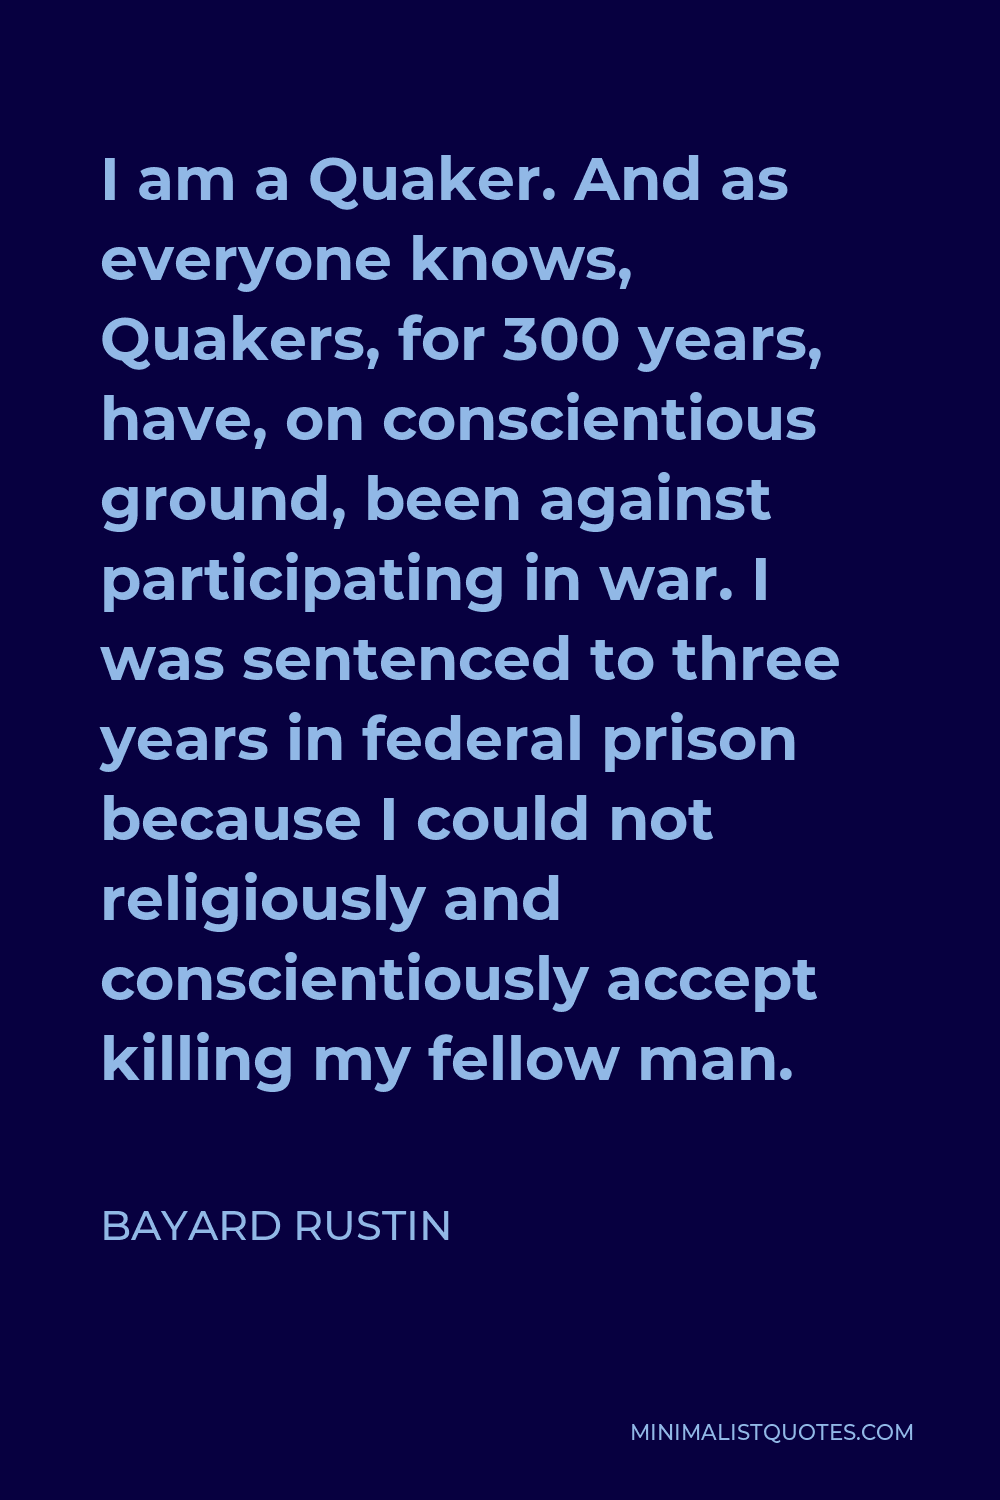 Bayard Rustin Quote - I am a Quaker. And as everyone knows, Quakers, for 300 years, have, on conscientious ground, been against participating in war. I was sentenced to three years in federal prison because I could not religiously and conscientiously accept killing my fellow man.